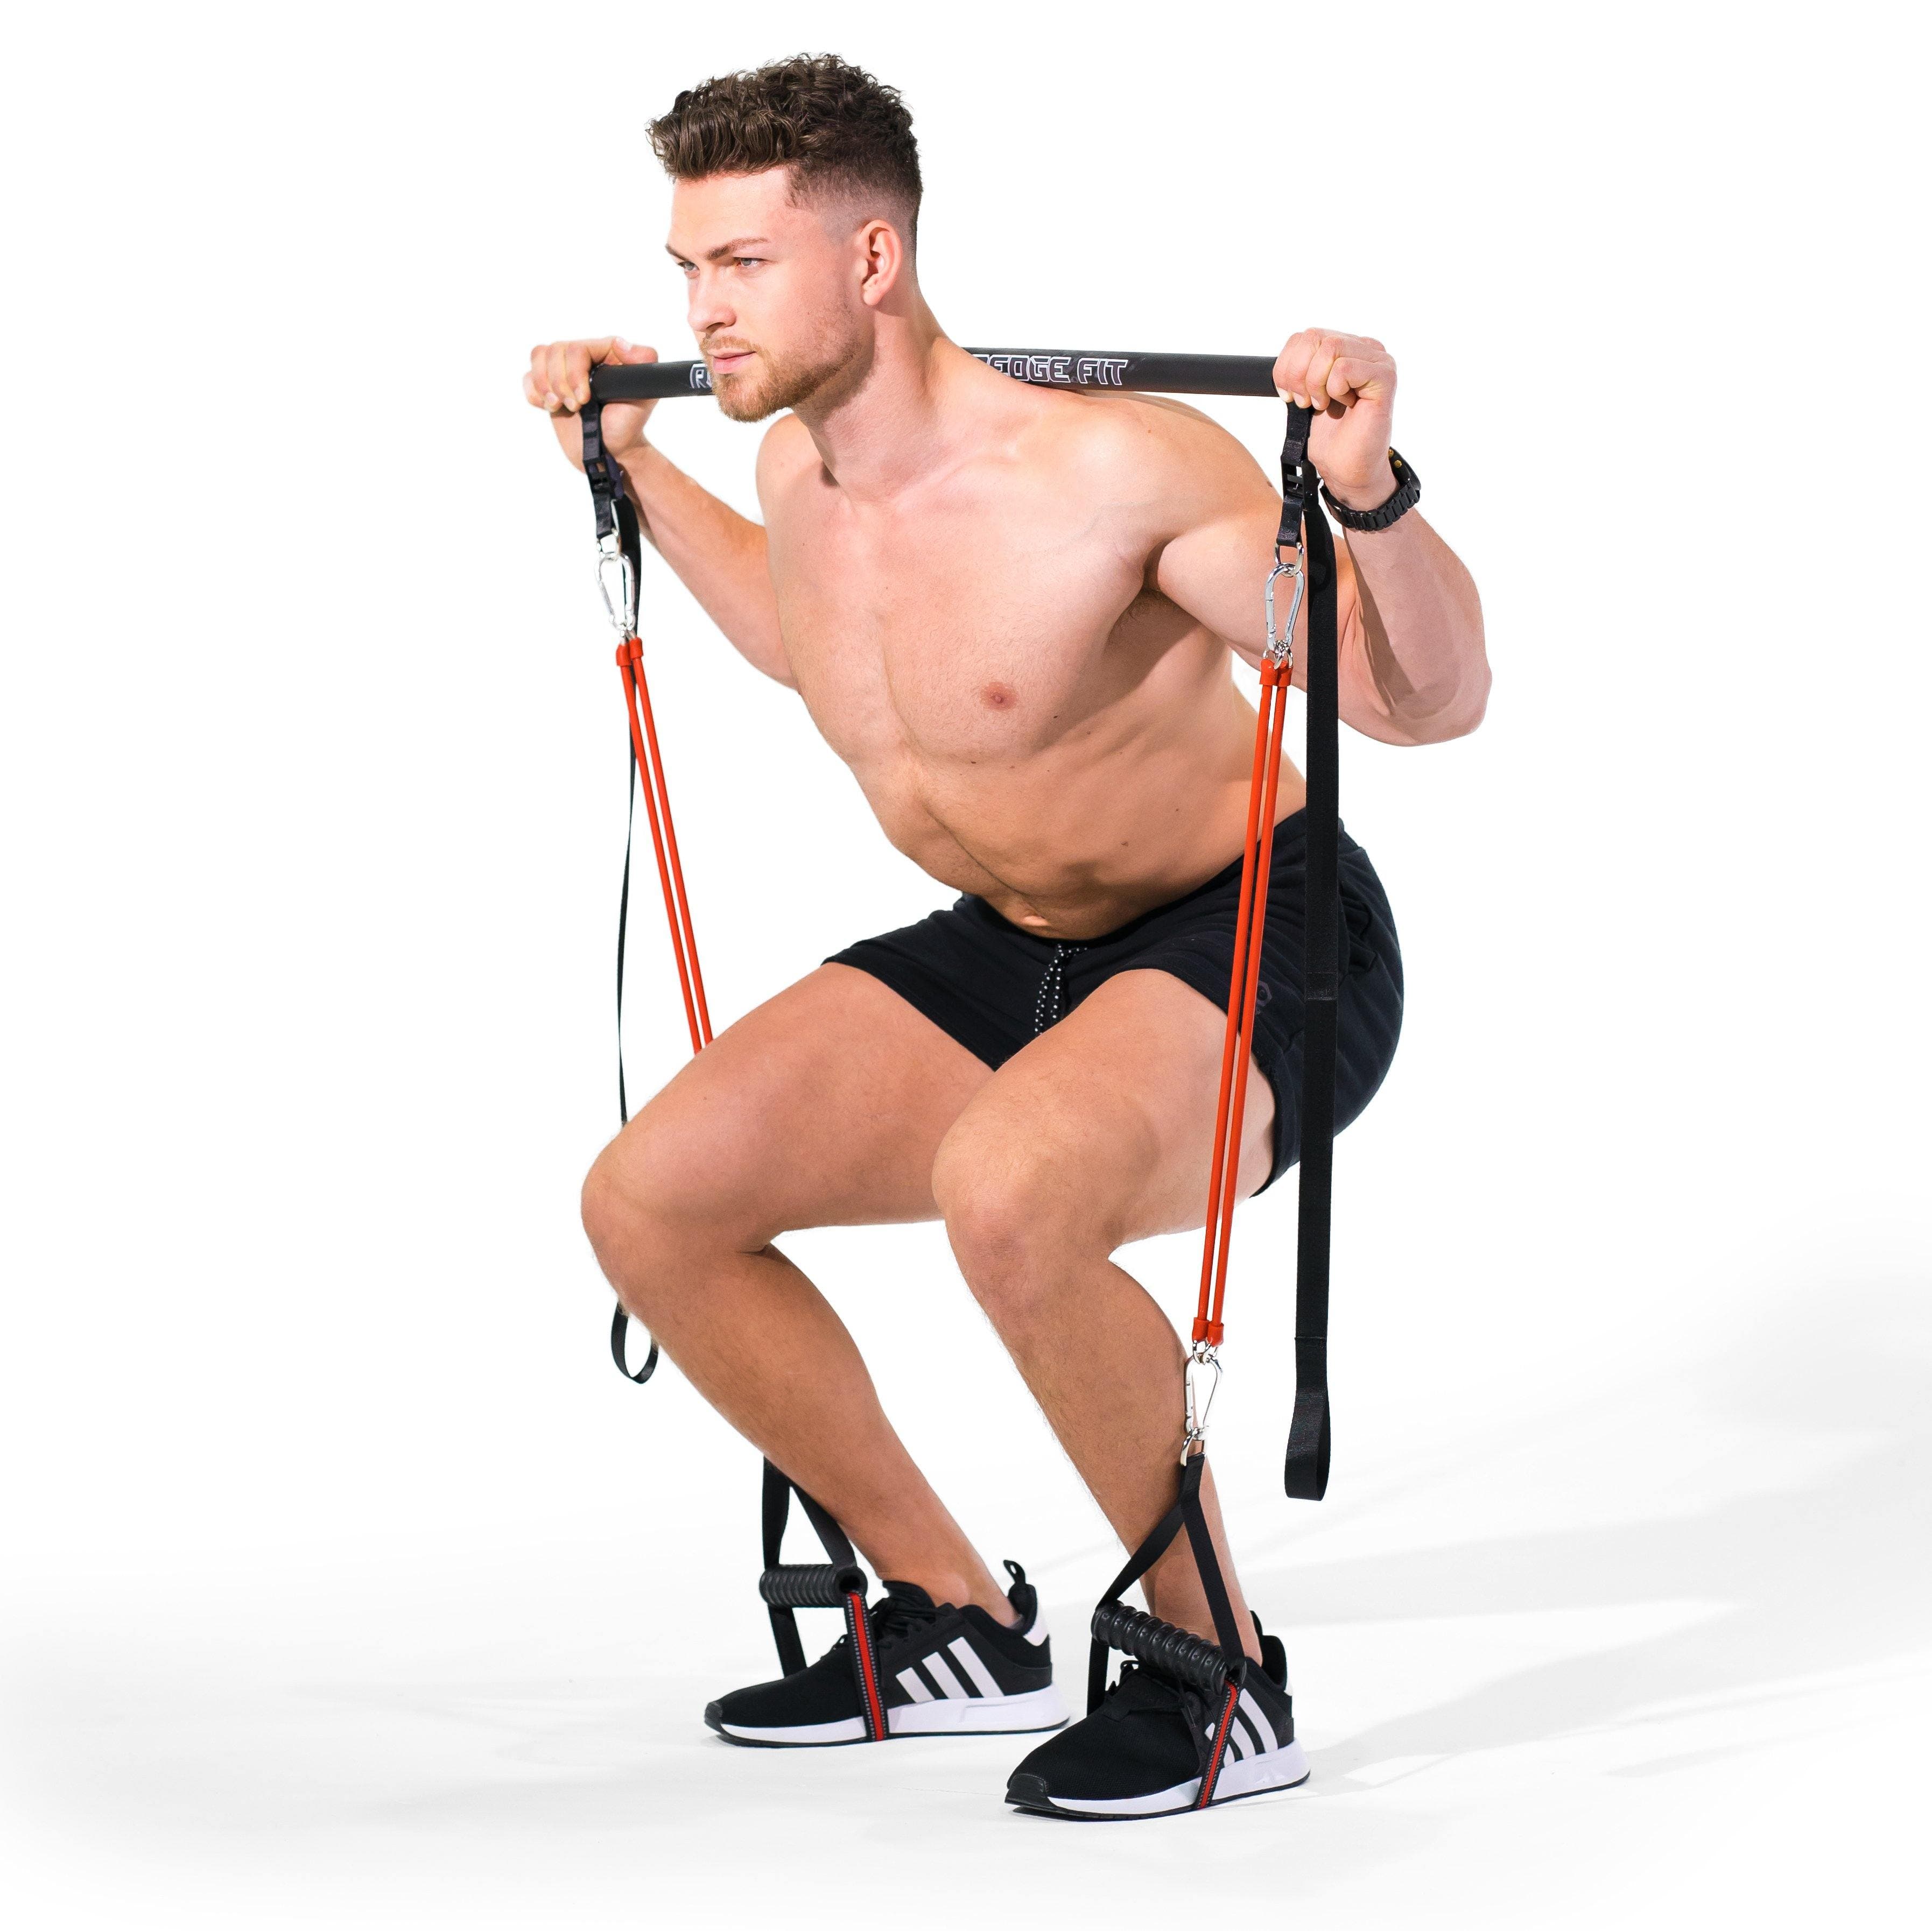 Man modeling the Redge Fit Portable Gym Machine Available at https://www.getredge.com/products/bar